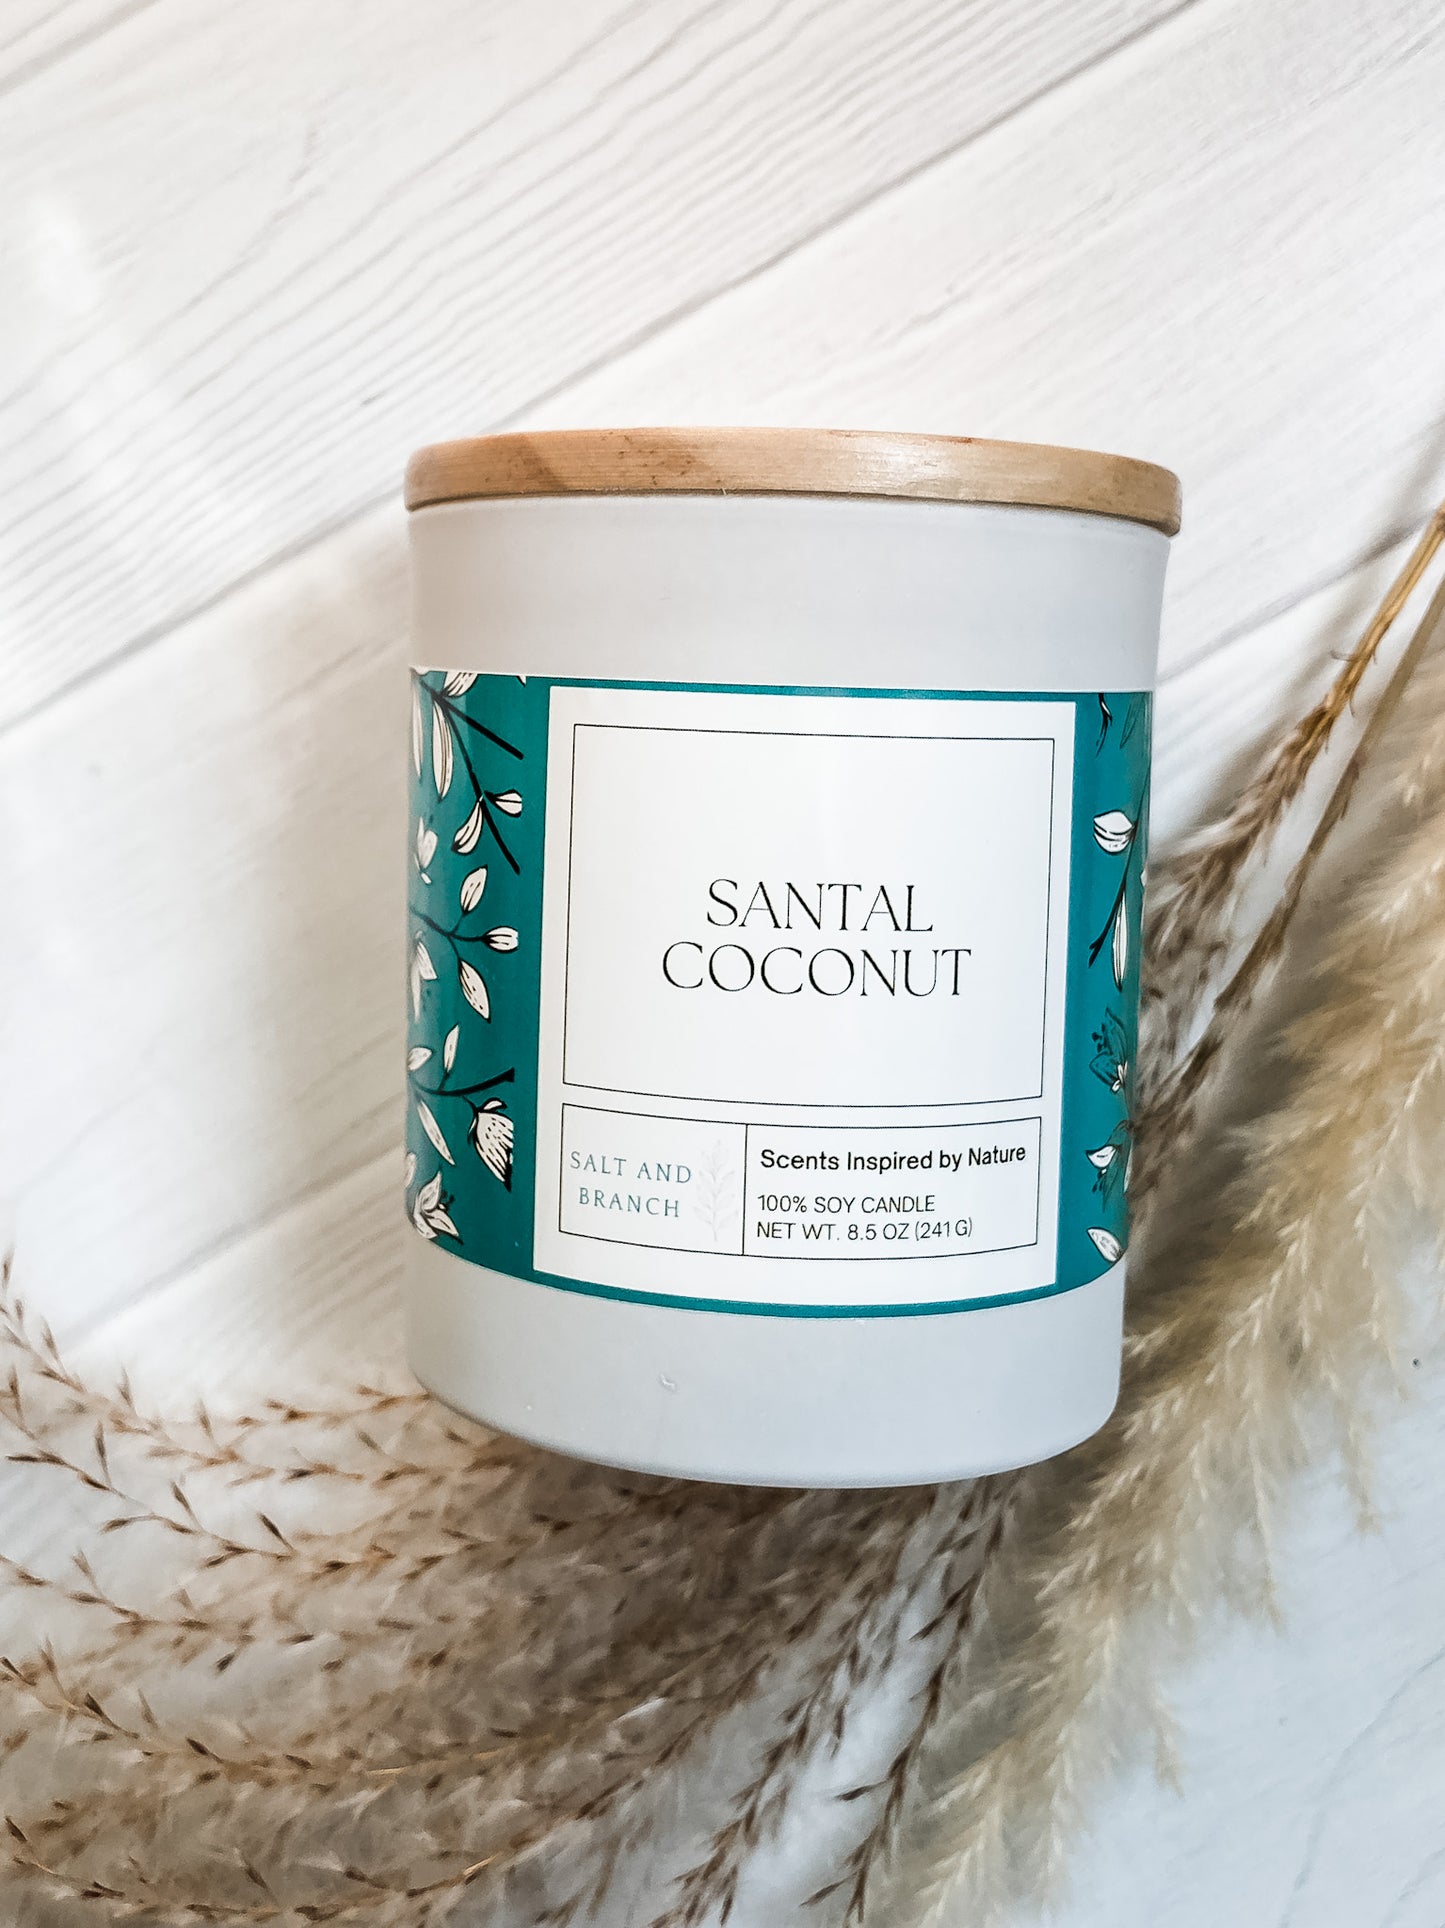 Santal Coconut Soy Candle - Salt and Branch